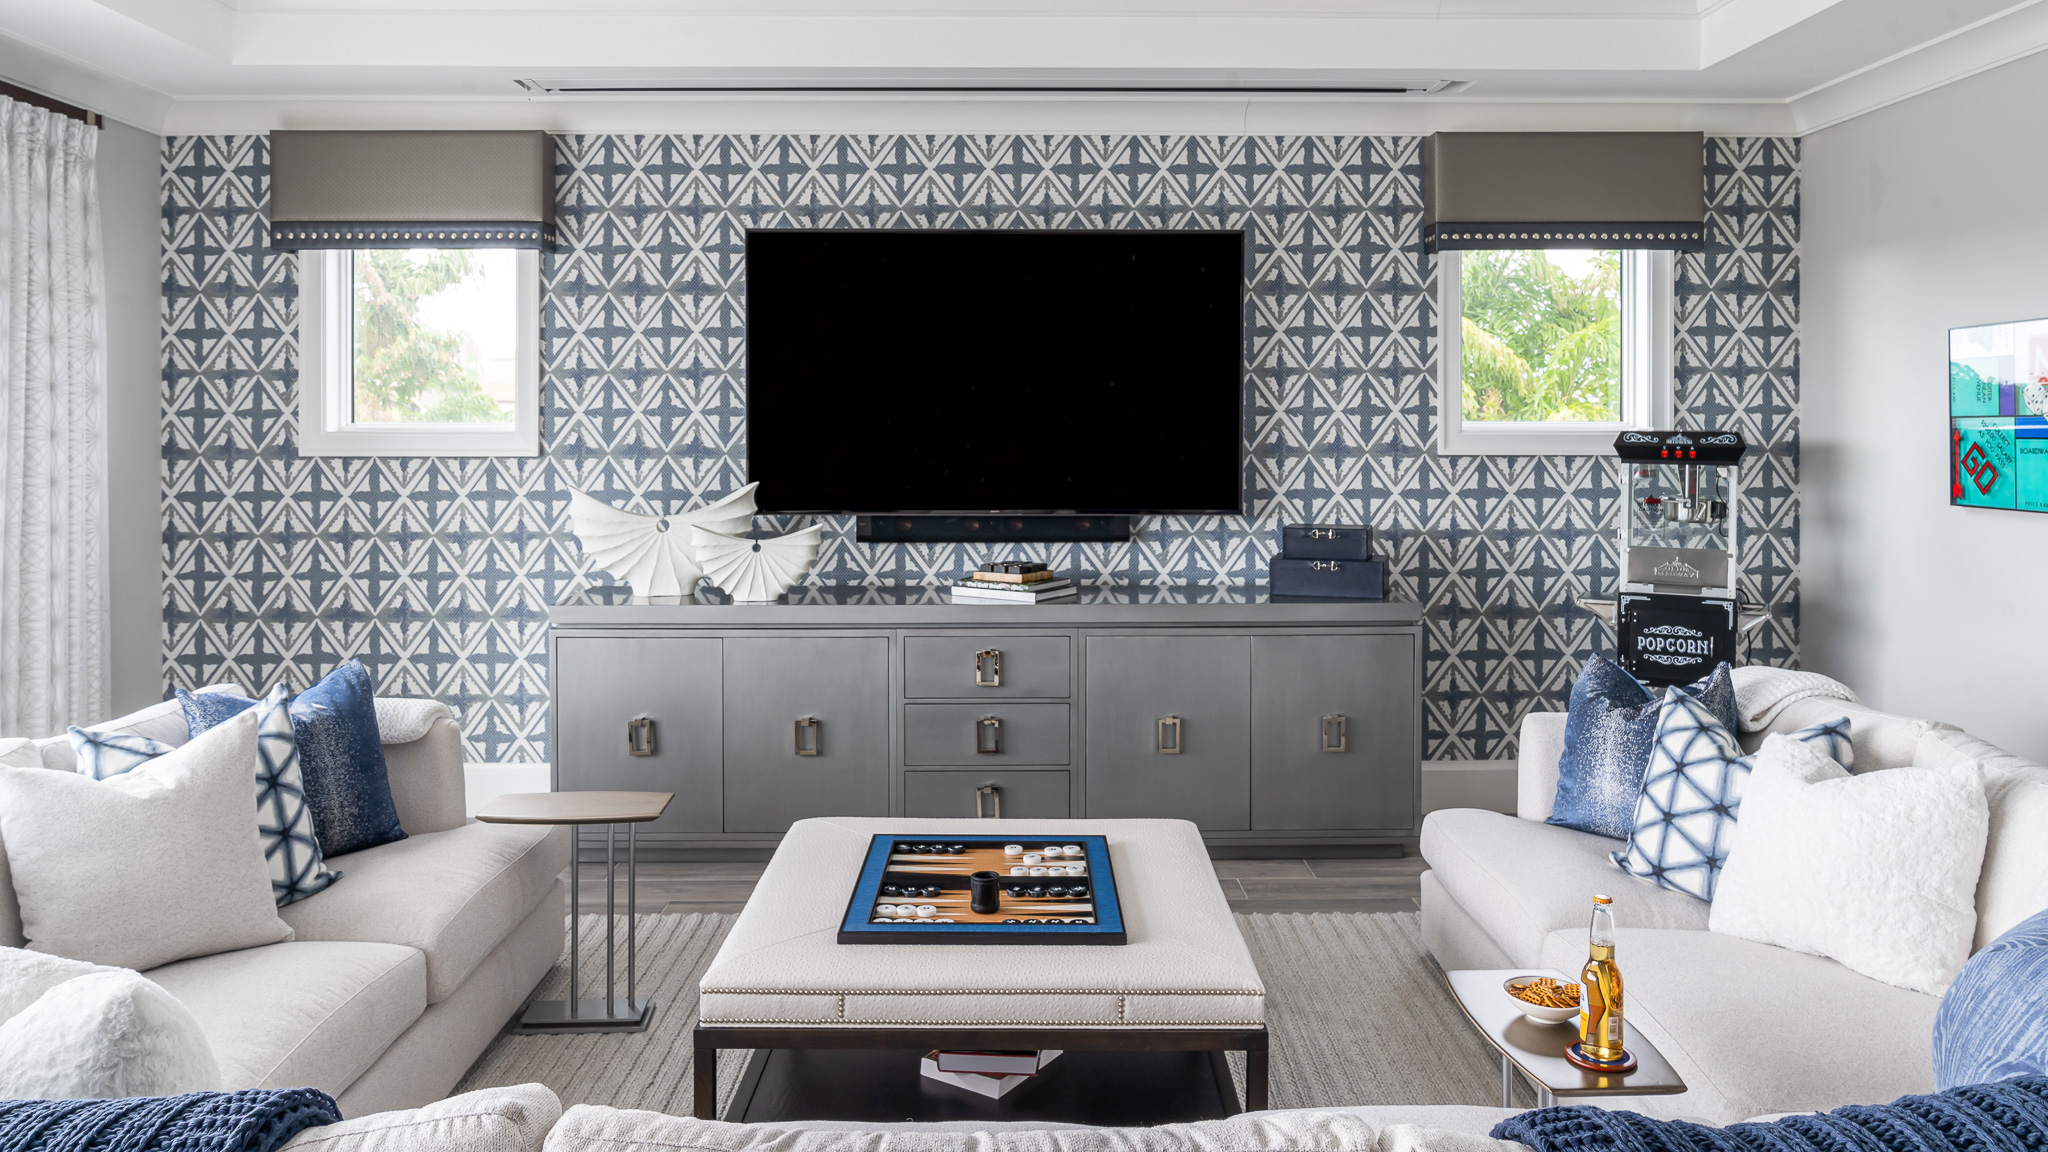 Media room design by Brooke Meyer and Lindsay Molinario of Gulfshore Interior Design - a bold modern design with blues and crisp whites